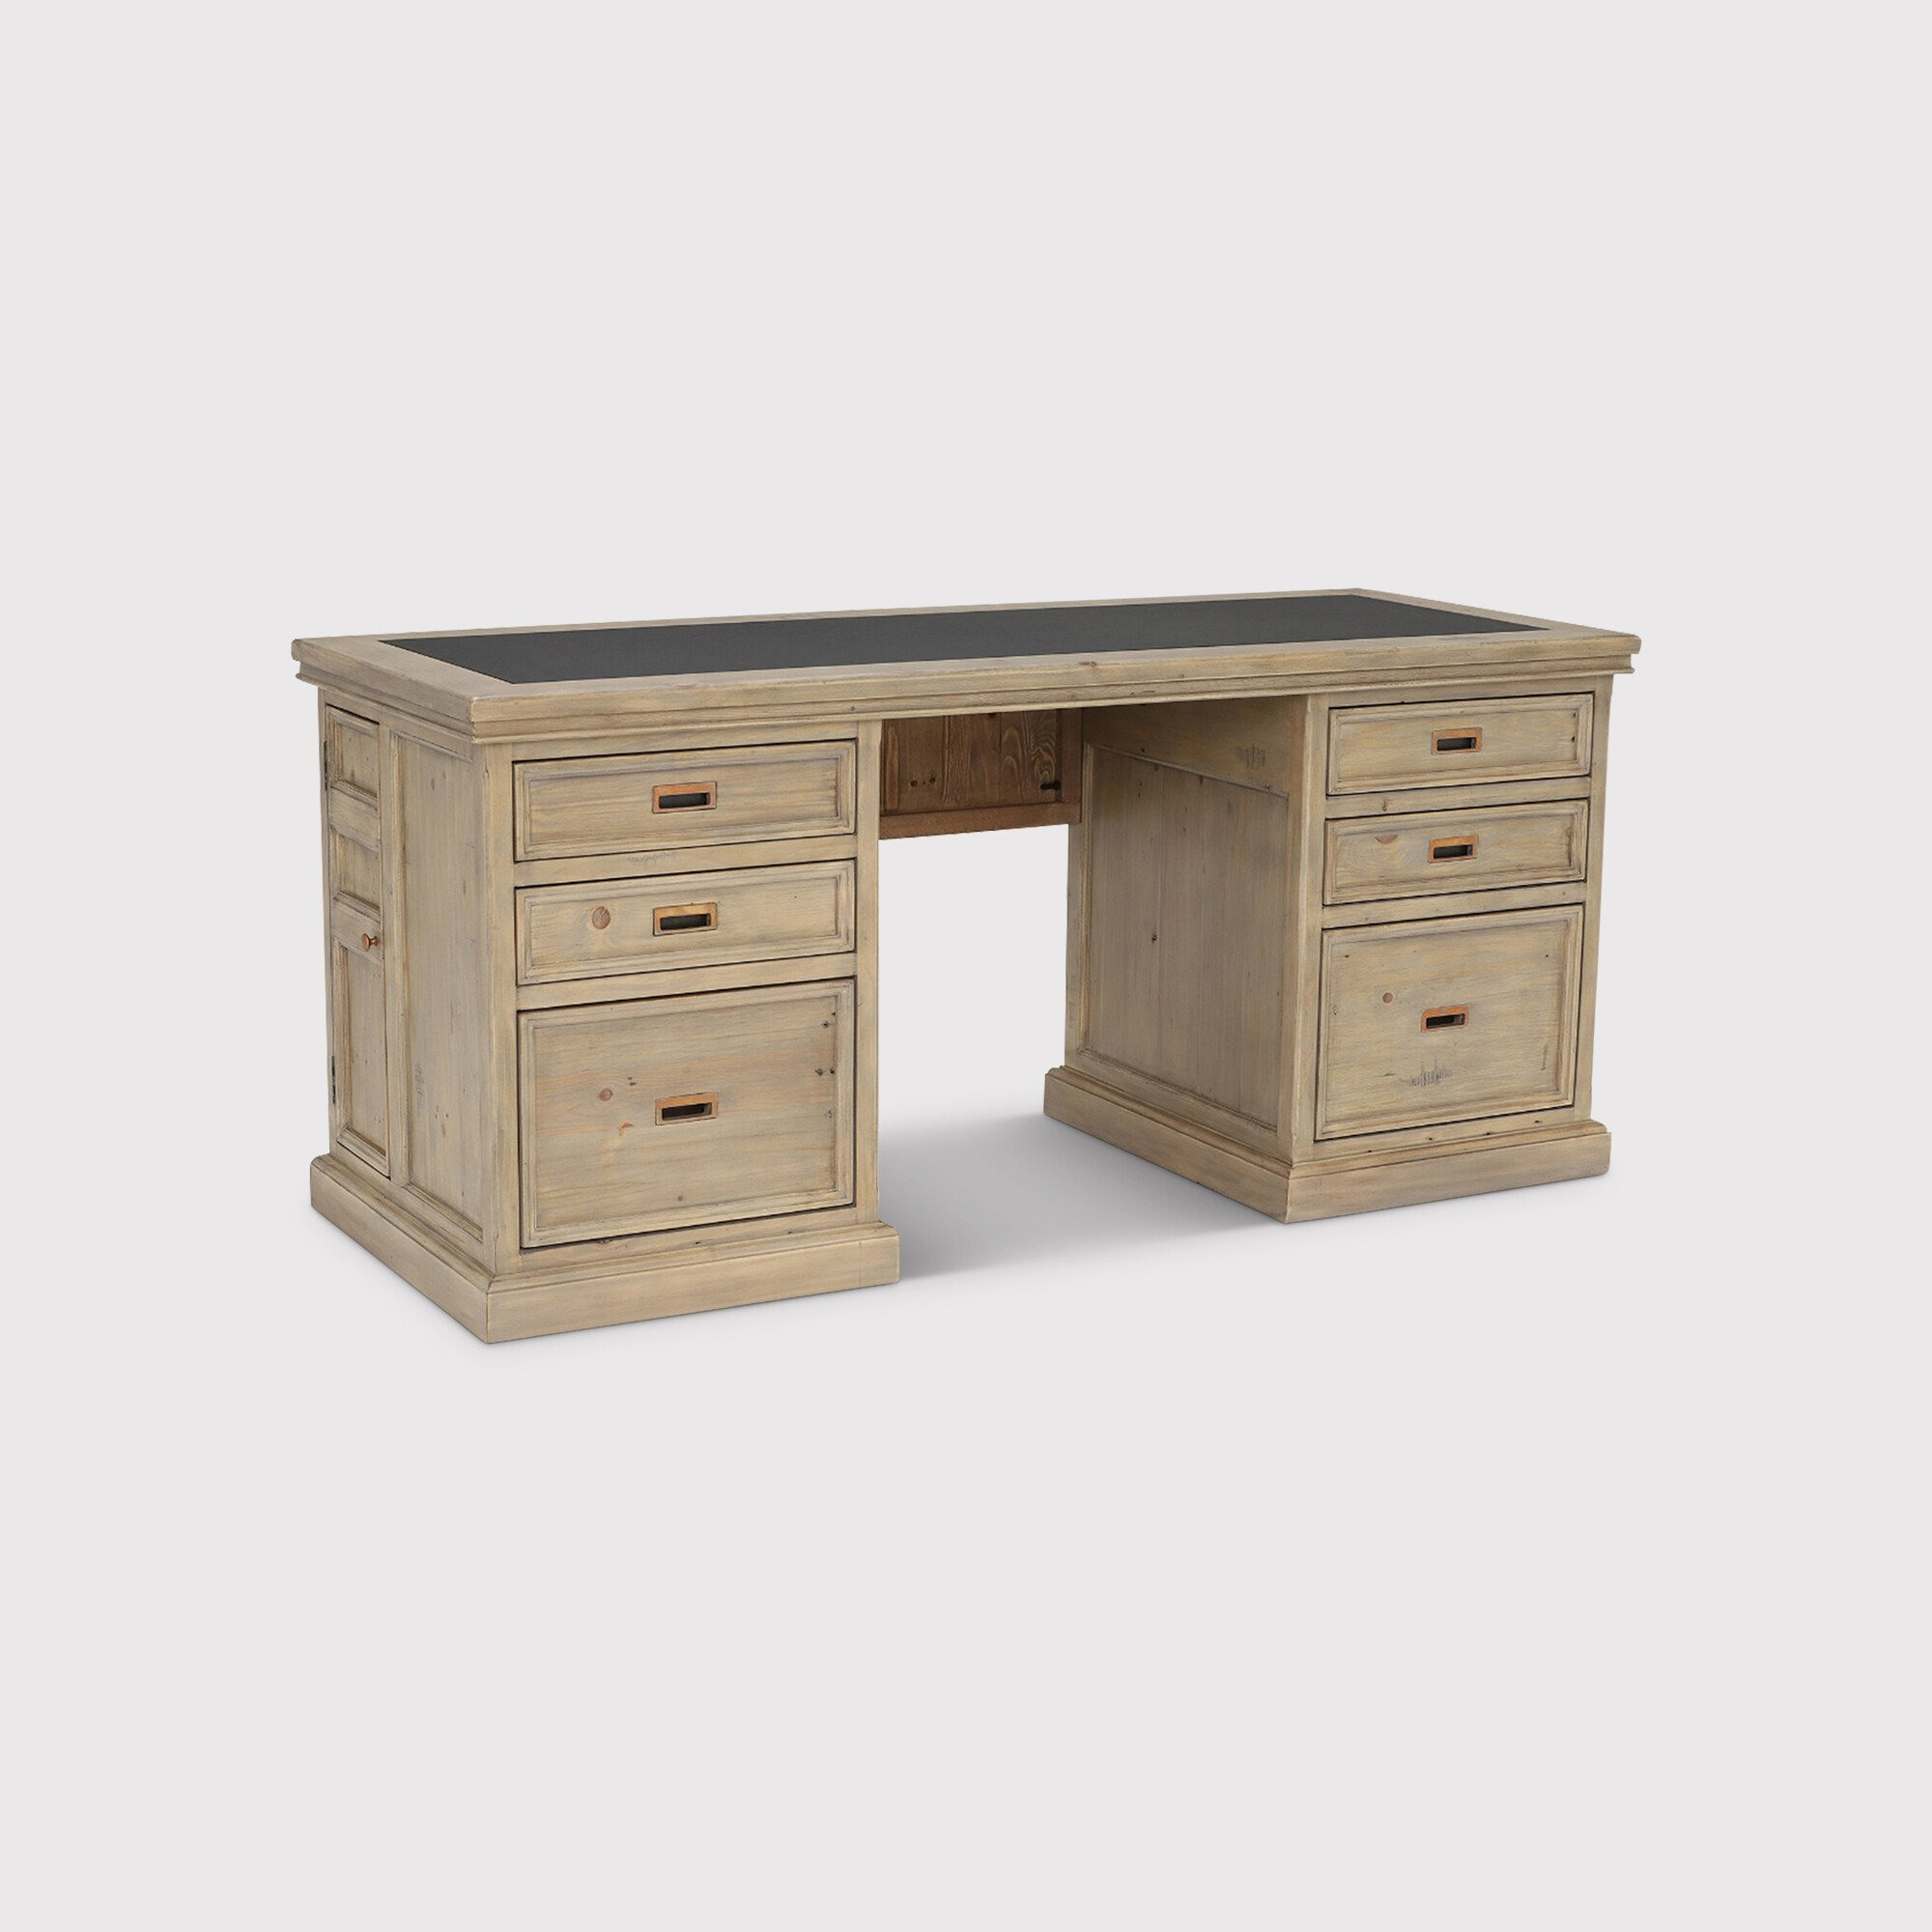 Verberie Desk Top With Vinyl Inlay & Drawers, Neutral Wood - Barker & Stonehouse - image 1